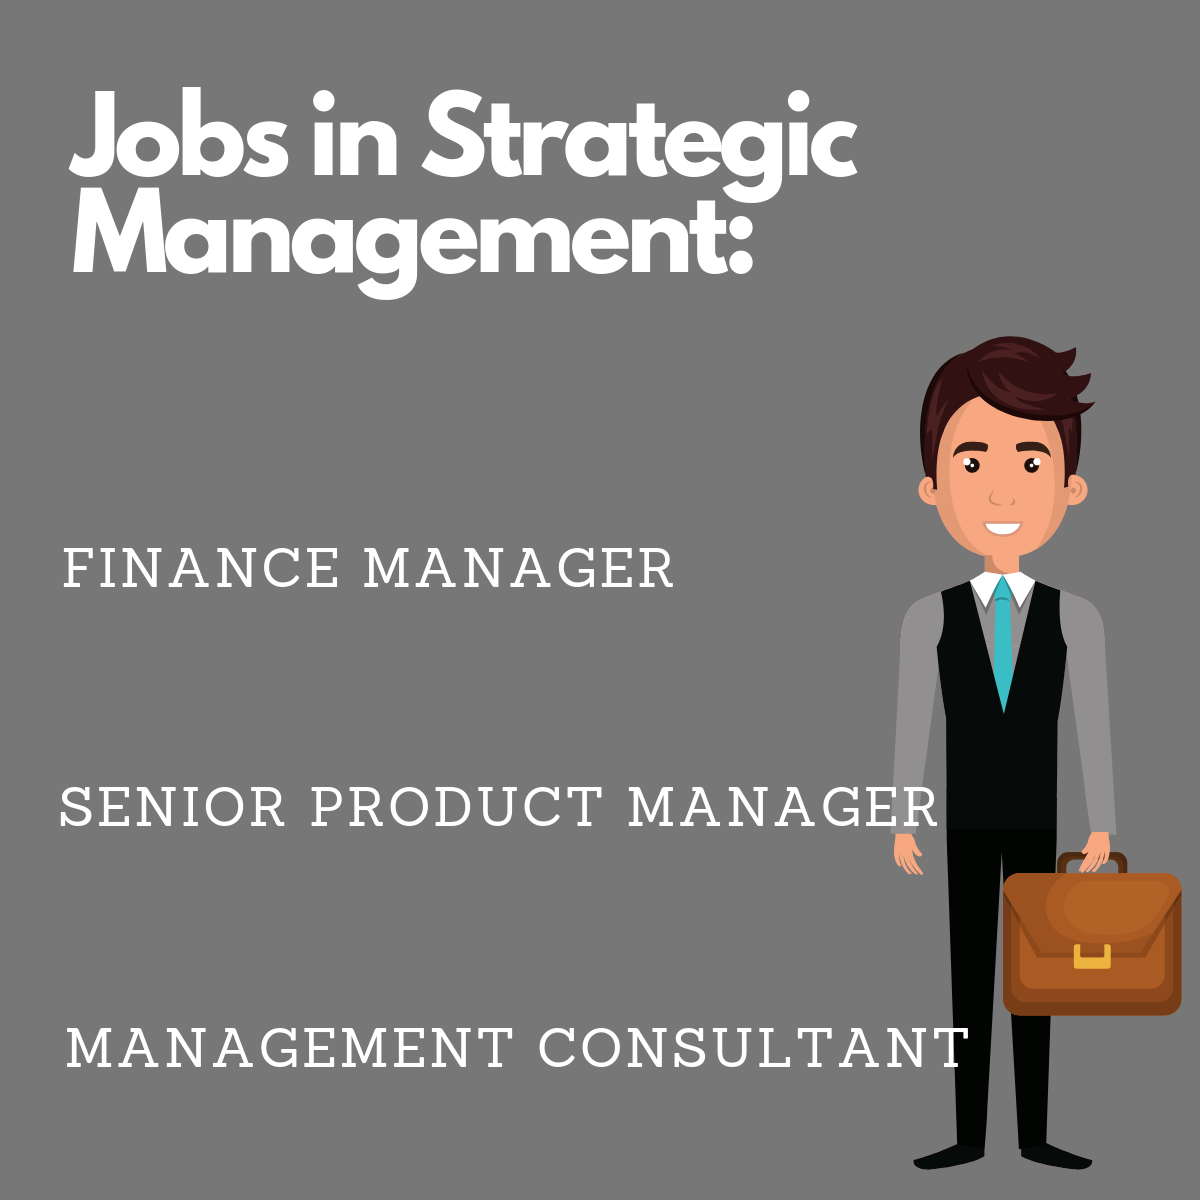 Jobs in Strategic Management: Finance Manager, Senior Product Manager, Management Consultant.